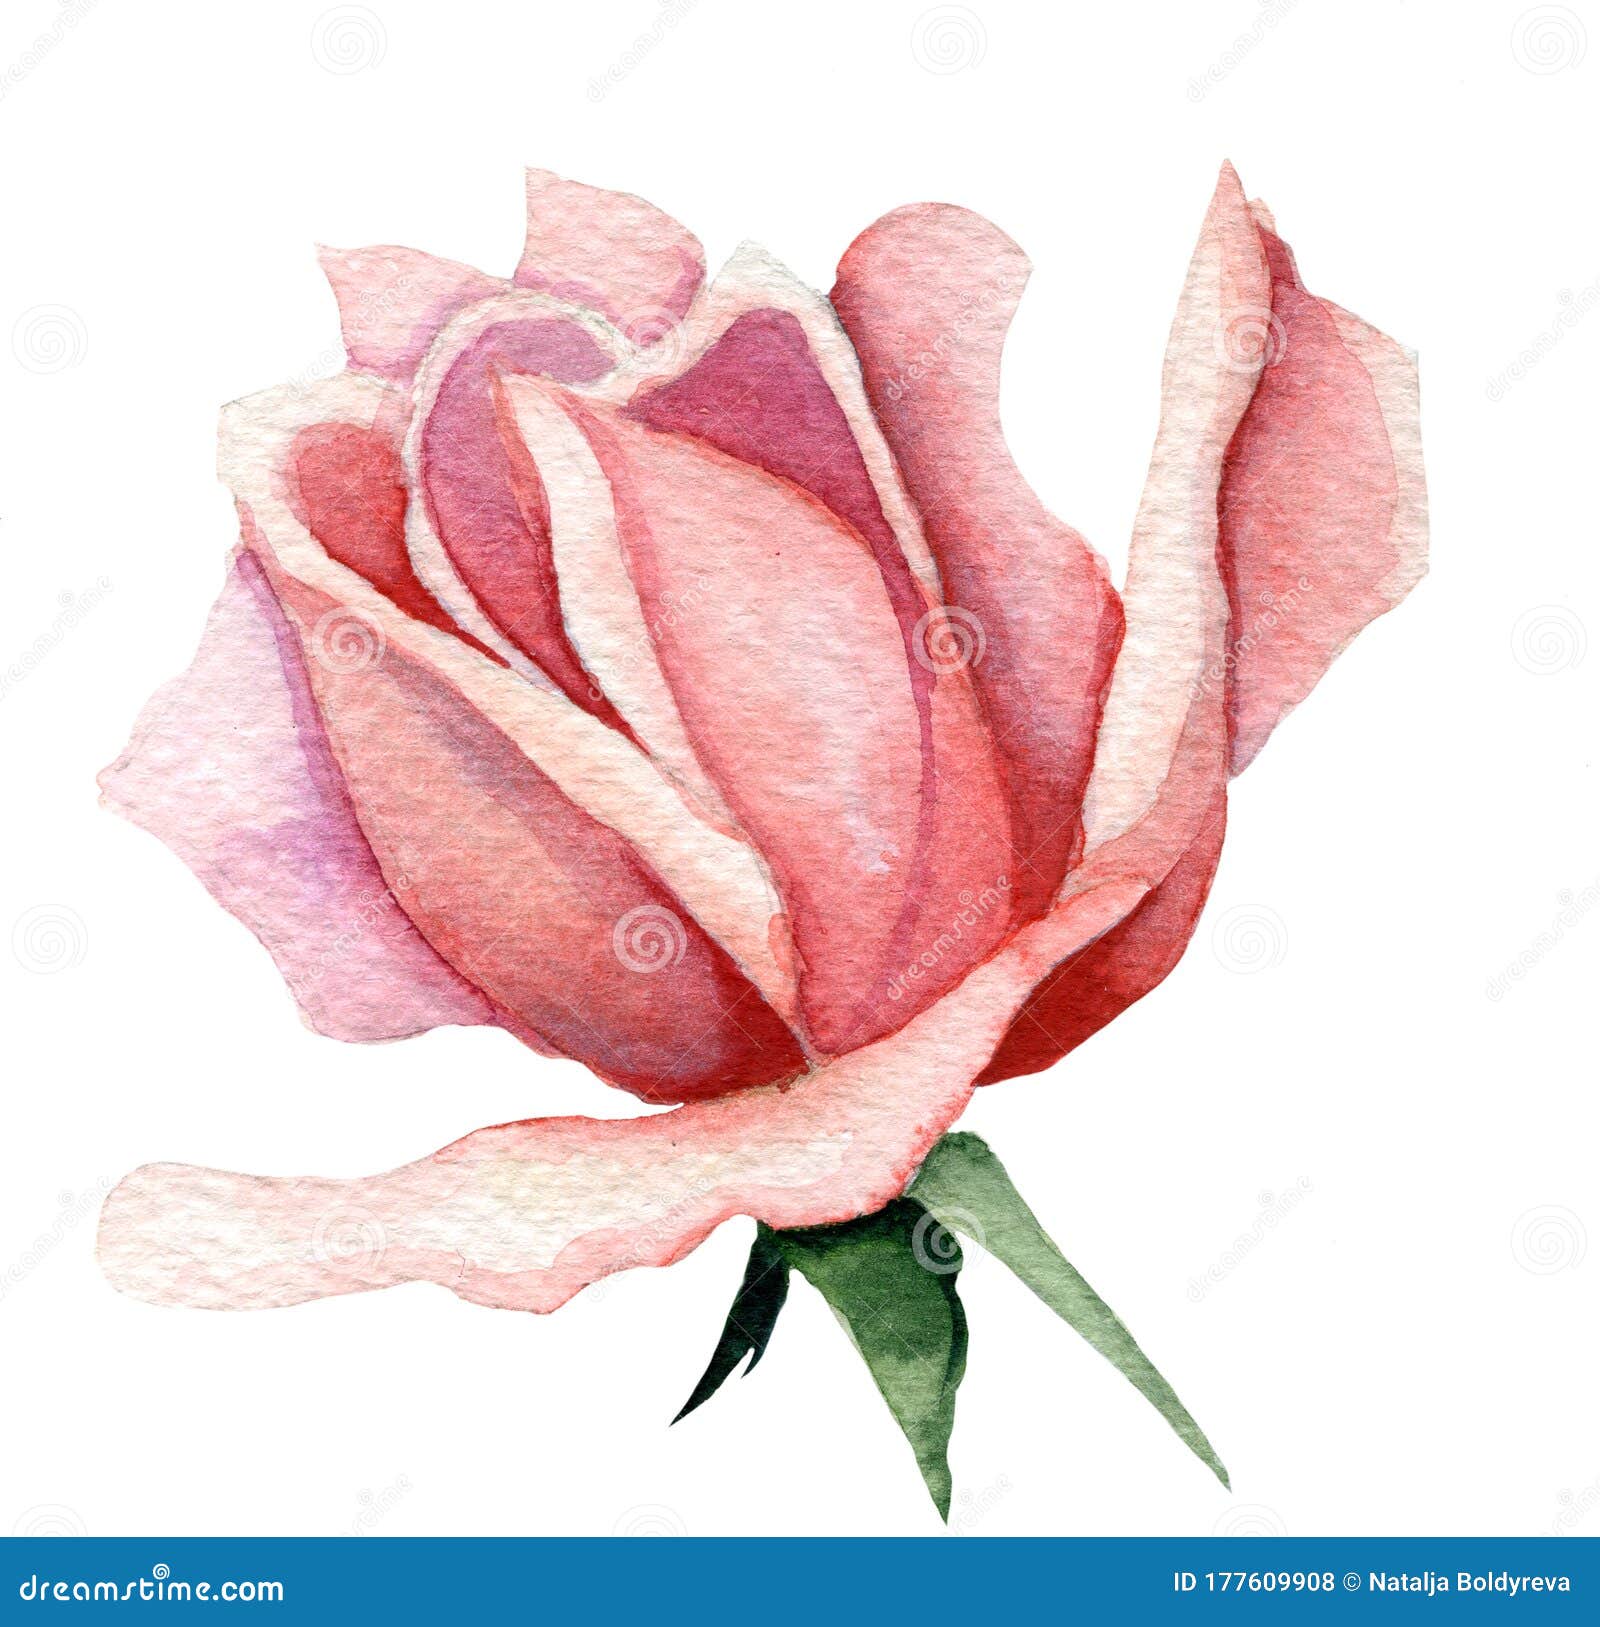 Hand Painted Watercolor Pink Rose Bud Stock Illustration - Illustration ...